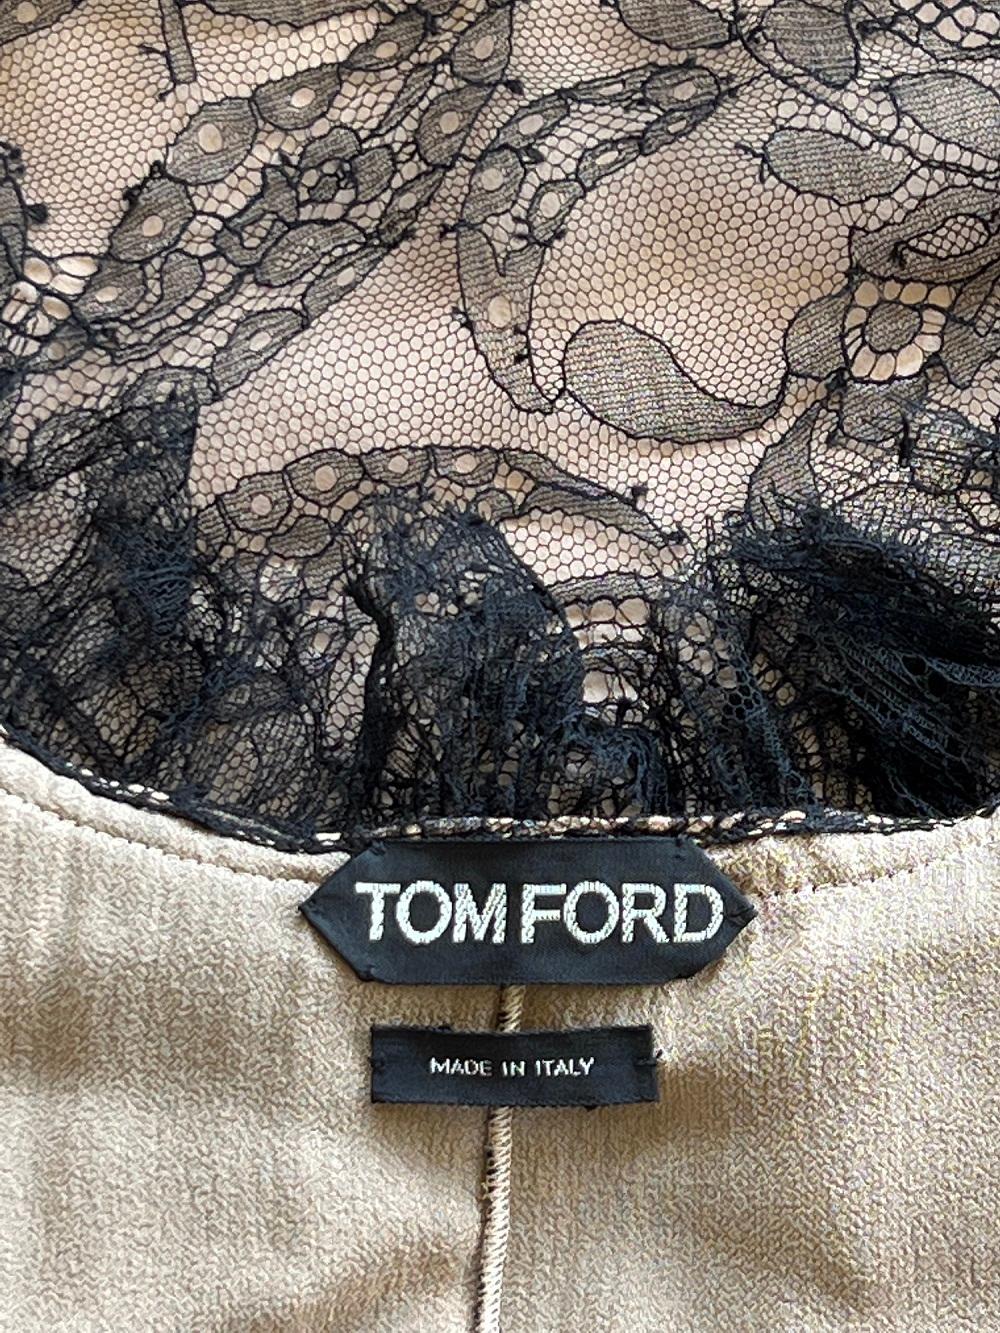 Tom Ford 1st Collection F/W 2011  Black Lace Velvet Sexy Wrap Dress Italian 40 For Sale 10